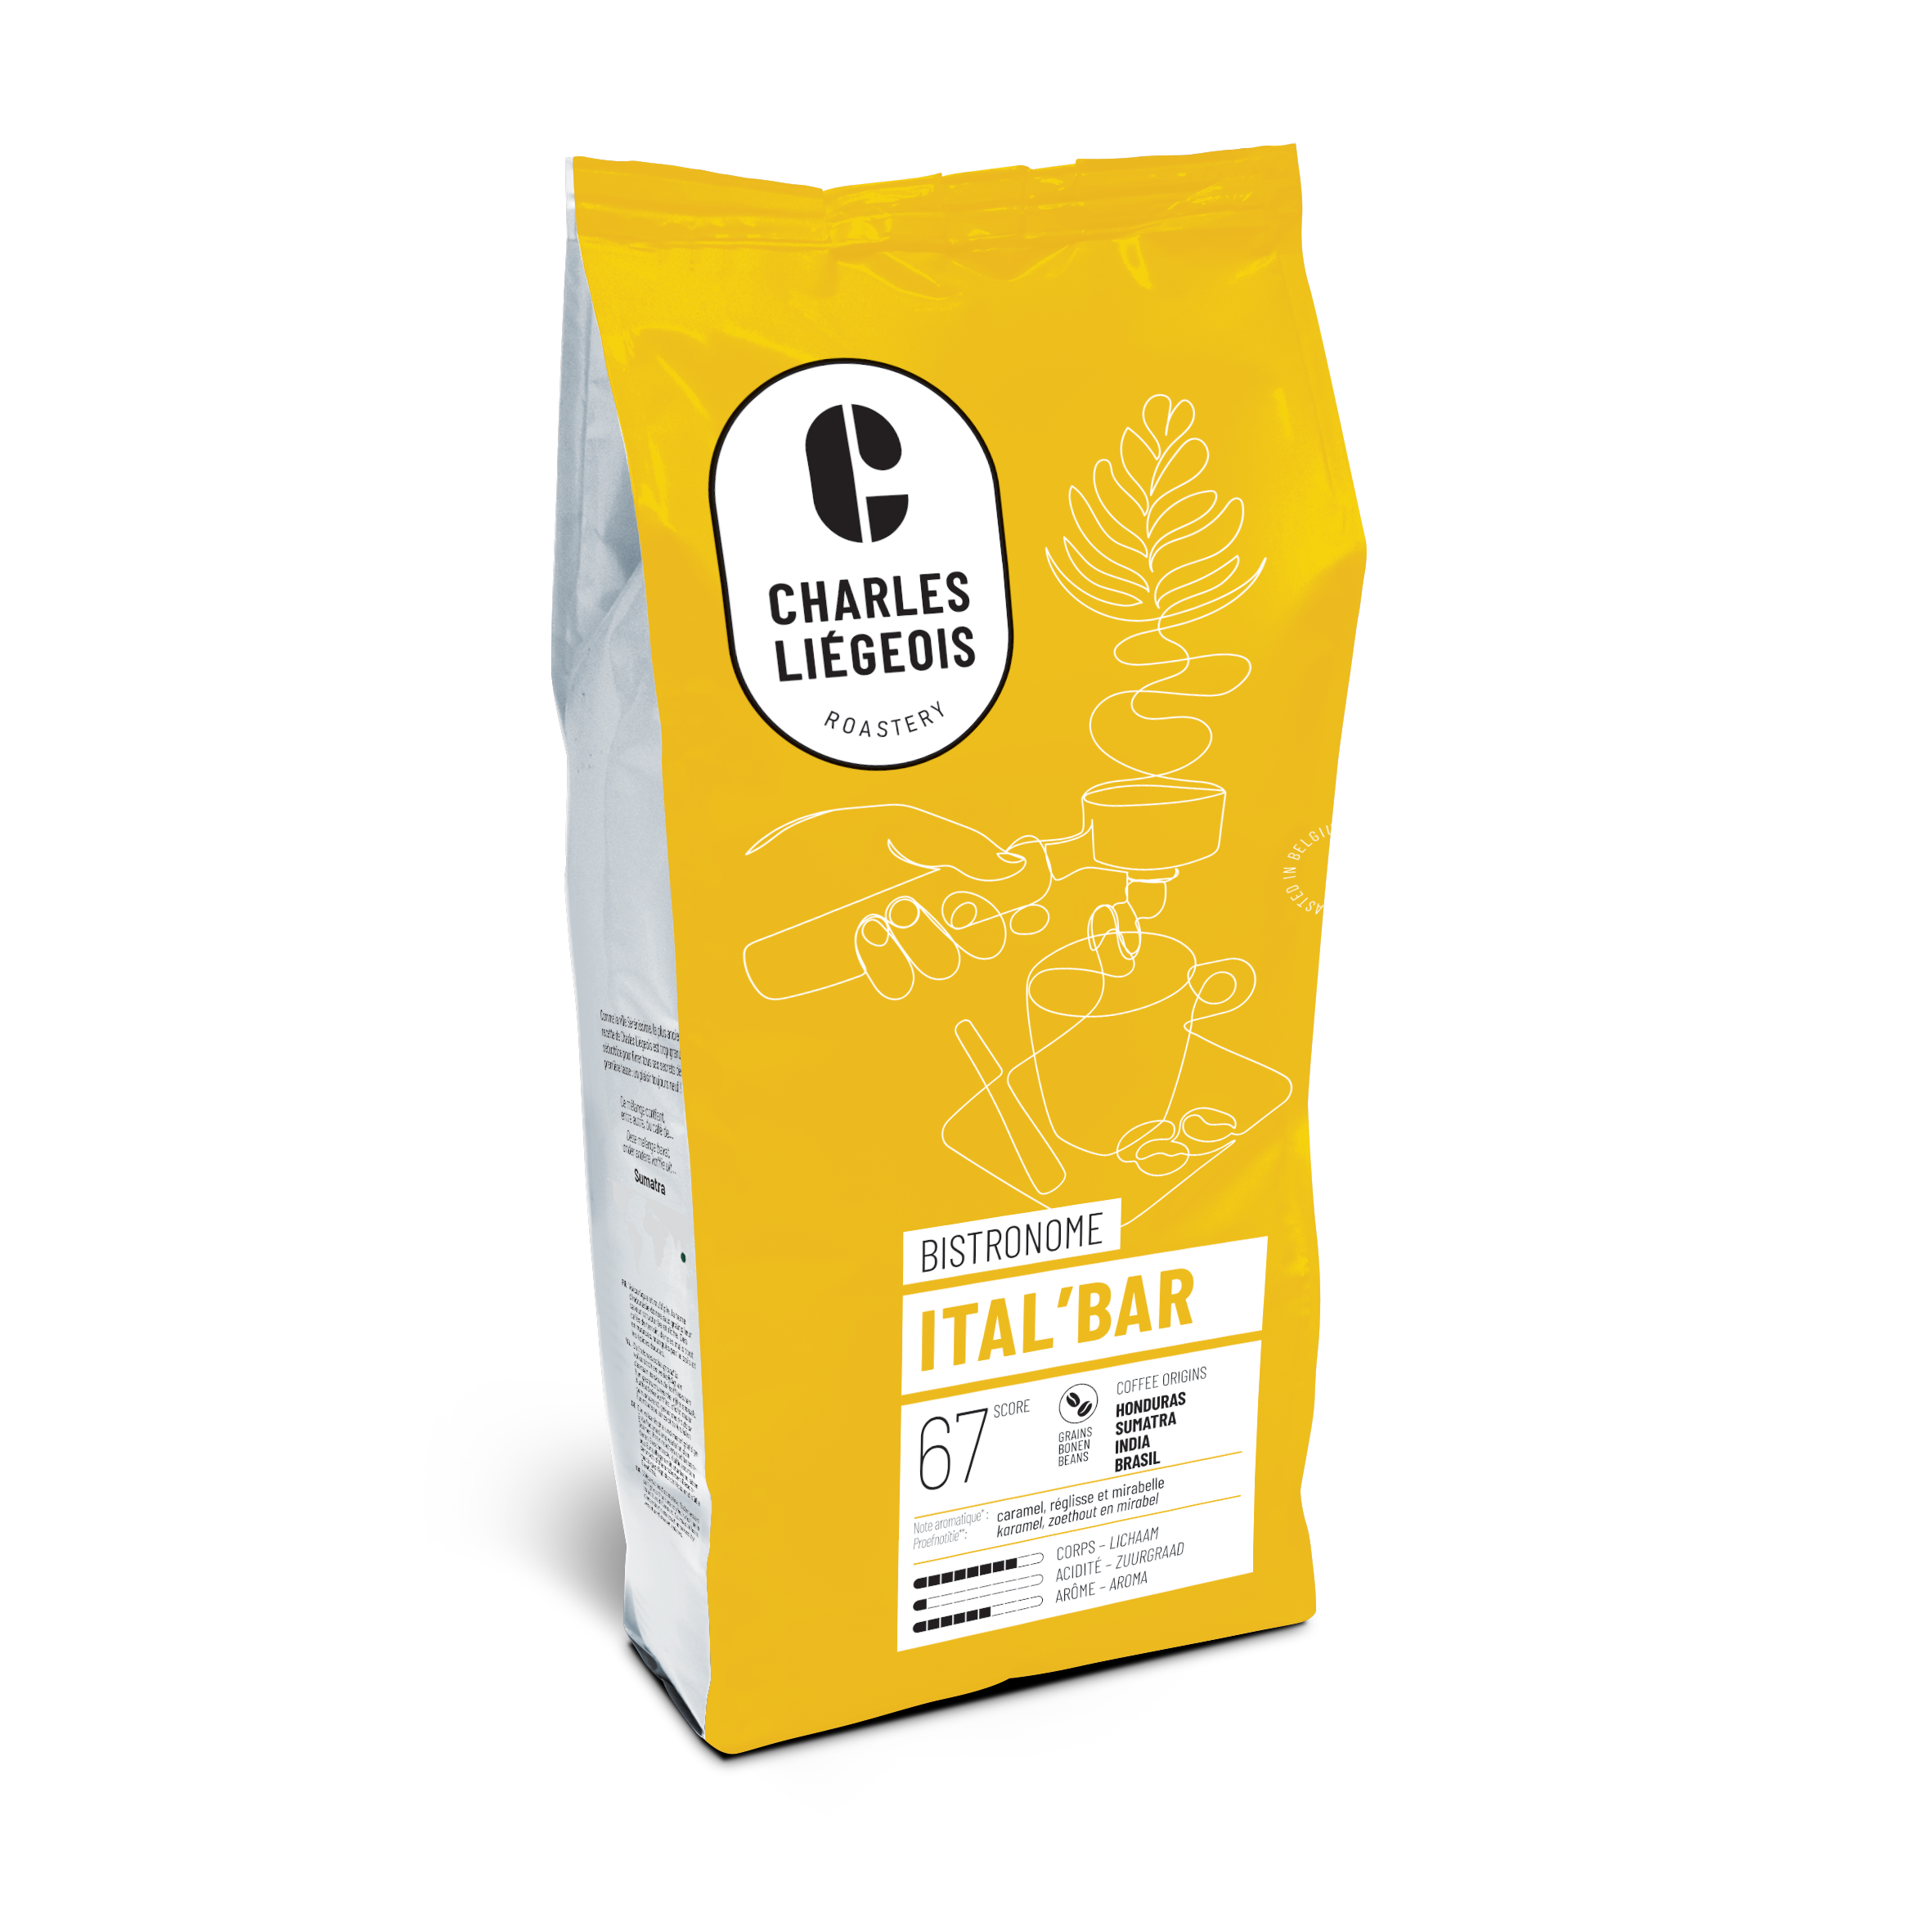 gamma Bistronome pack Ital'Bar Charles Liégeois Roastery